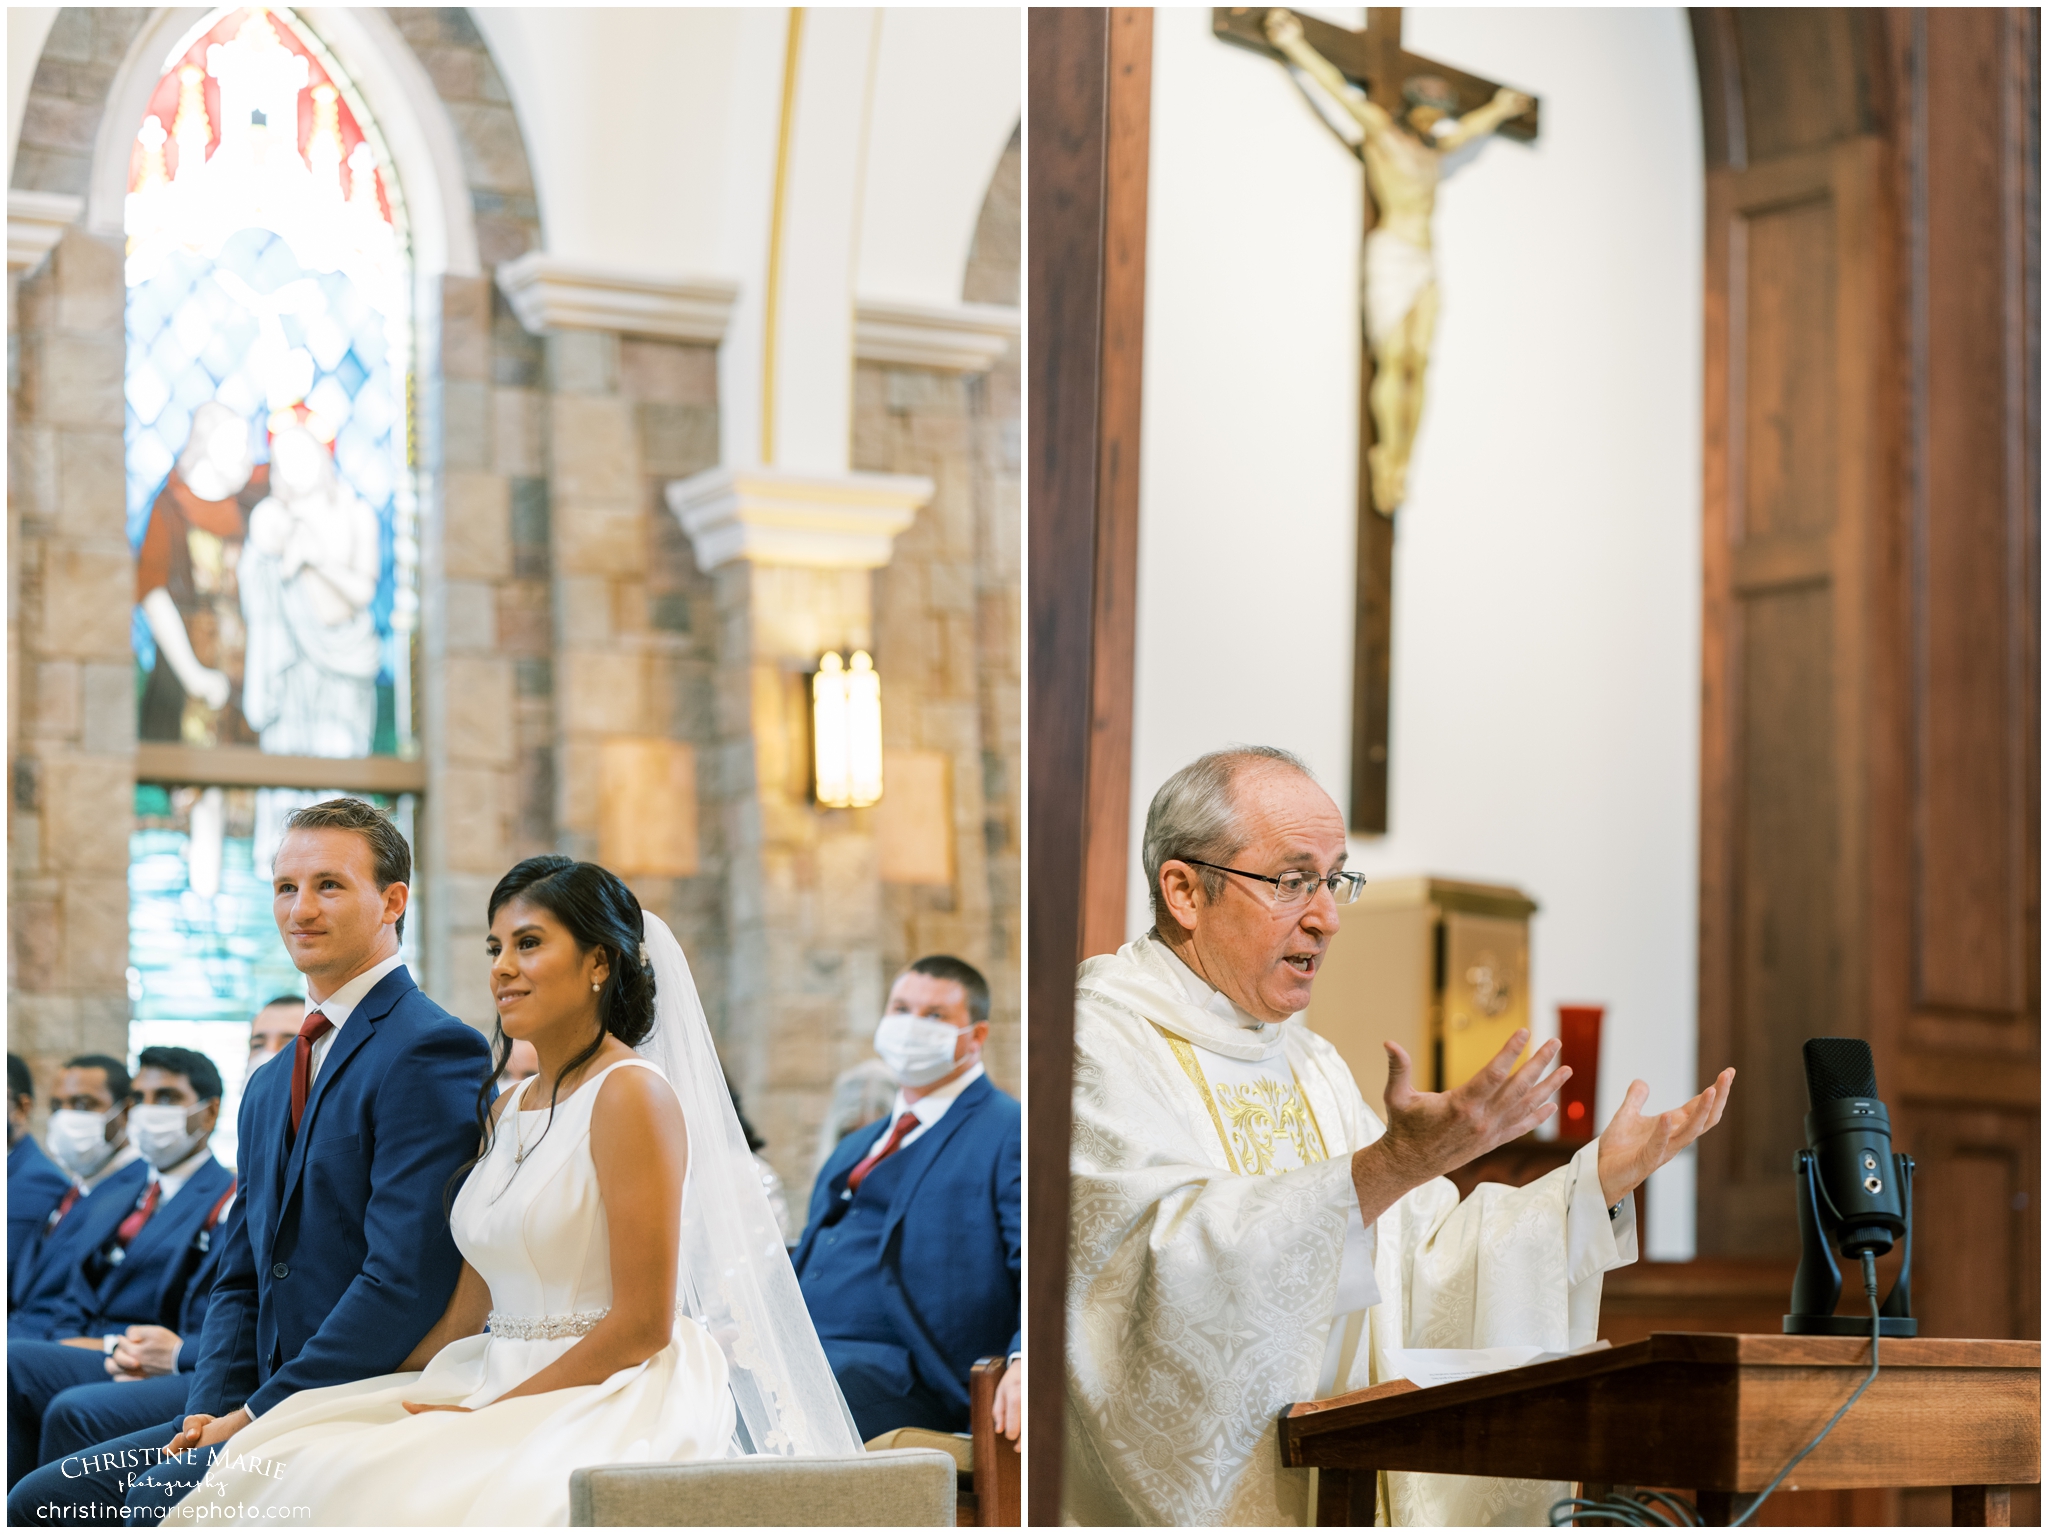 Fr. Martin Connor encouraging marriage and family